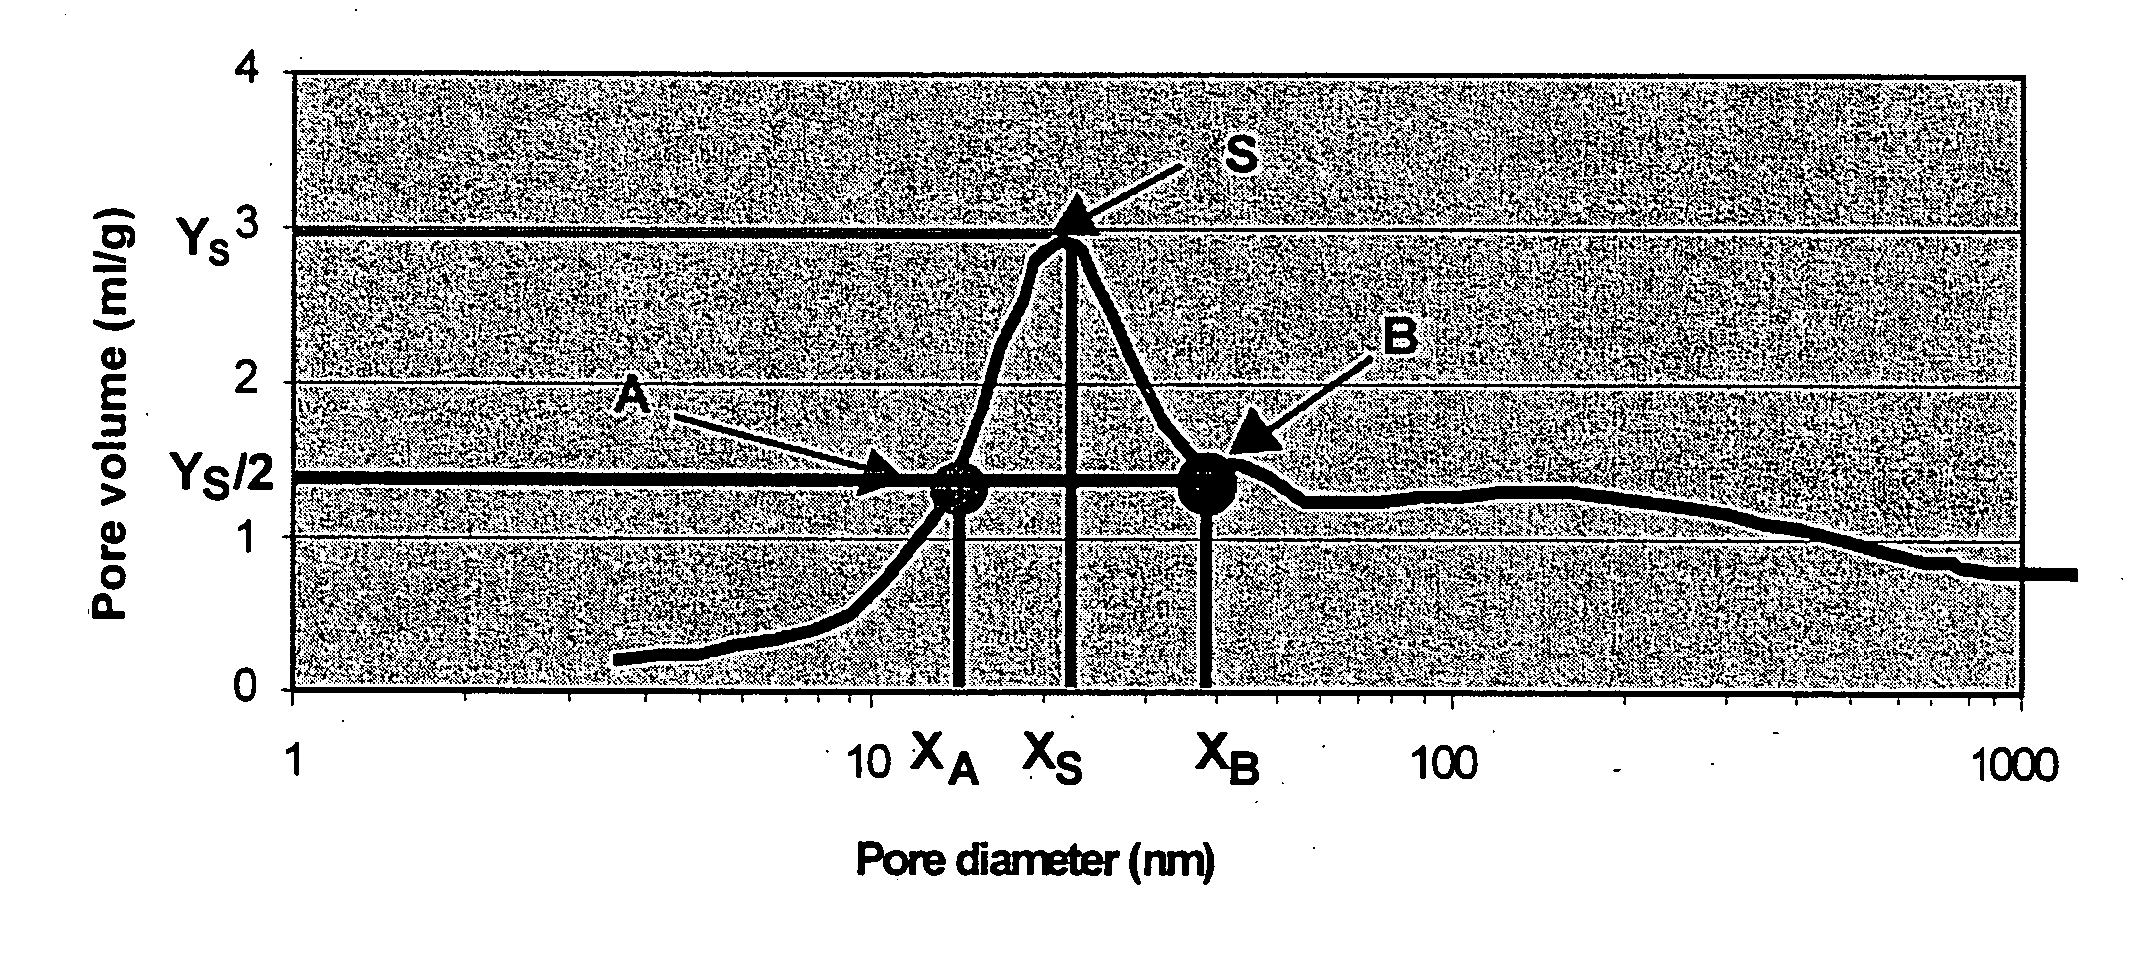 Diene rubber composition for tire comprising a specific silica as reinforcing filler